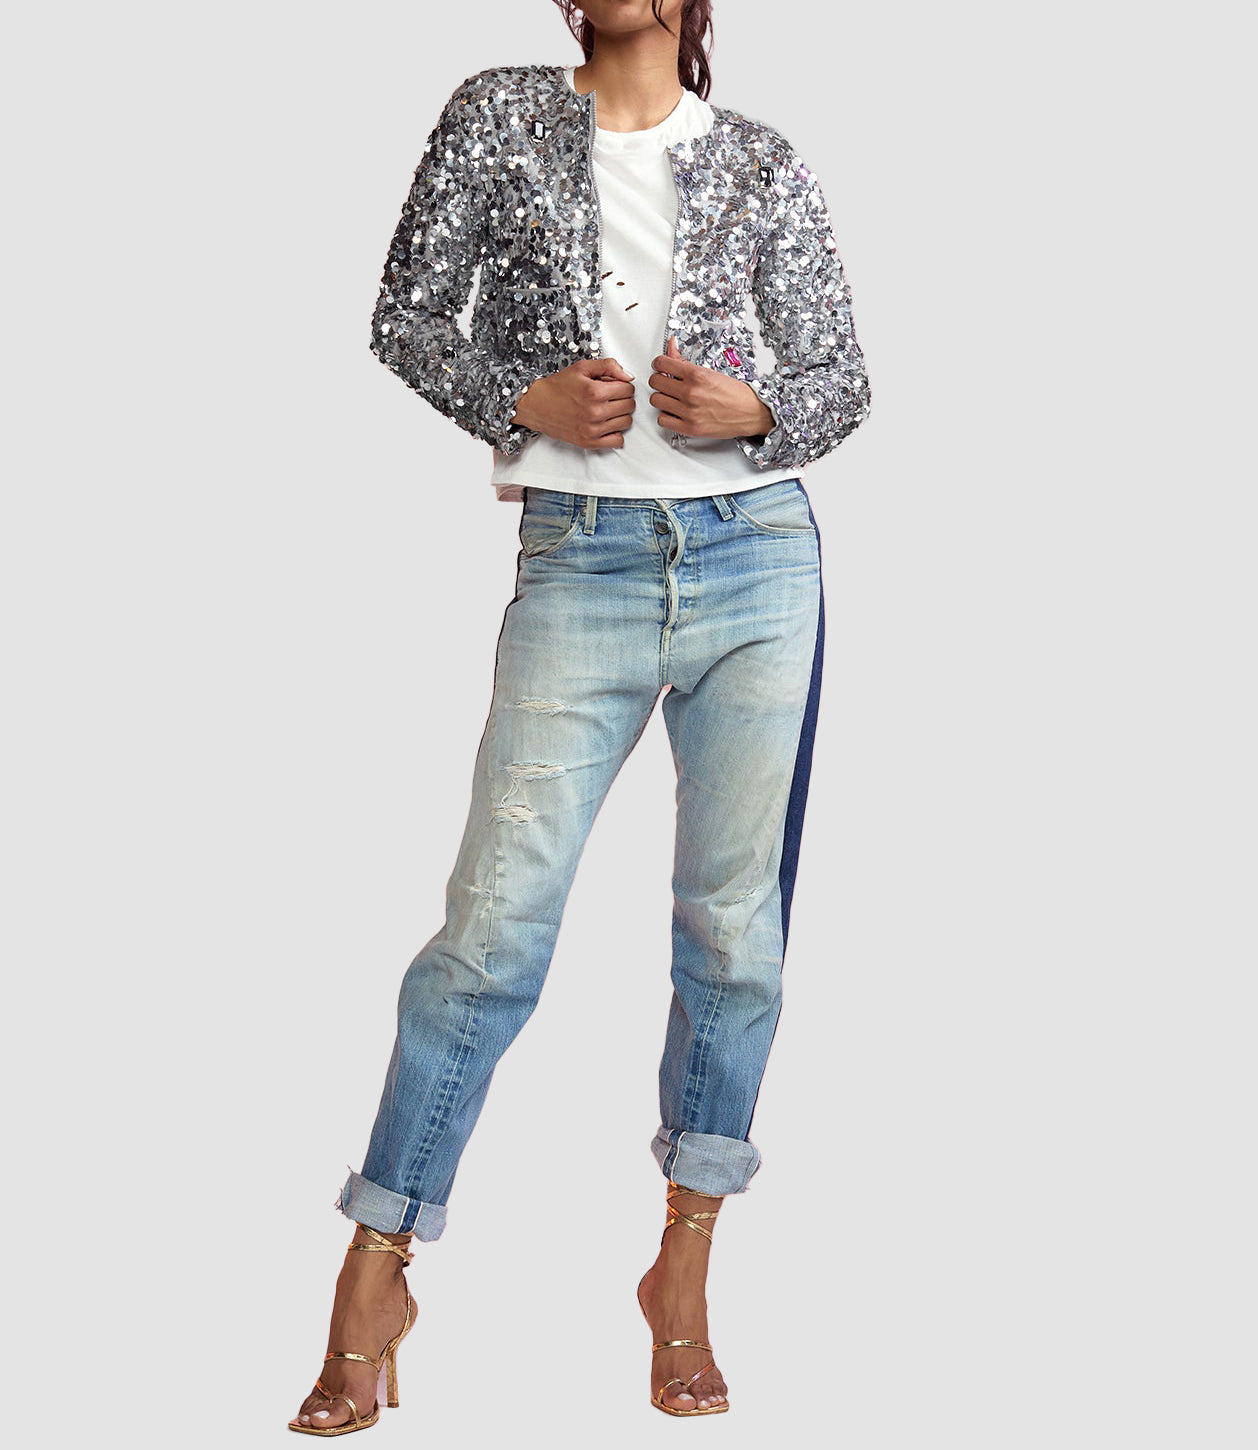 Sequin Cropped Cardigan